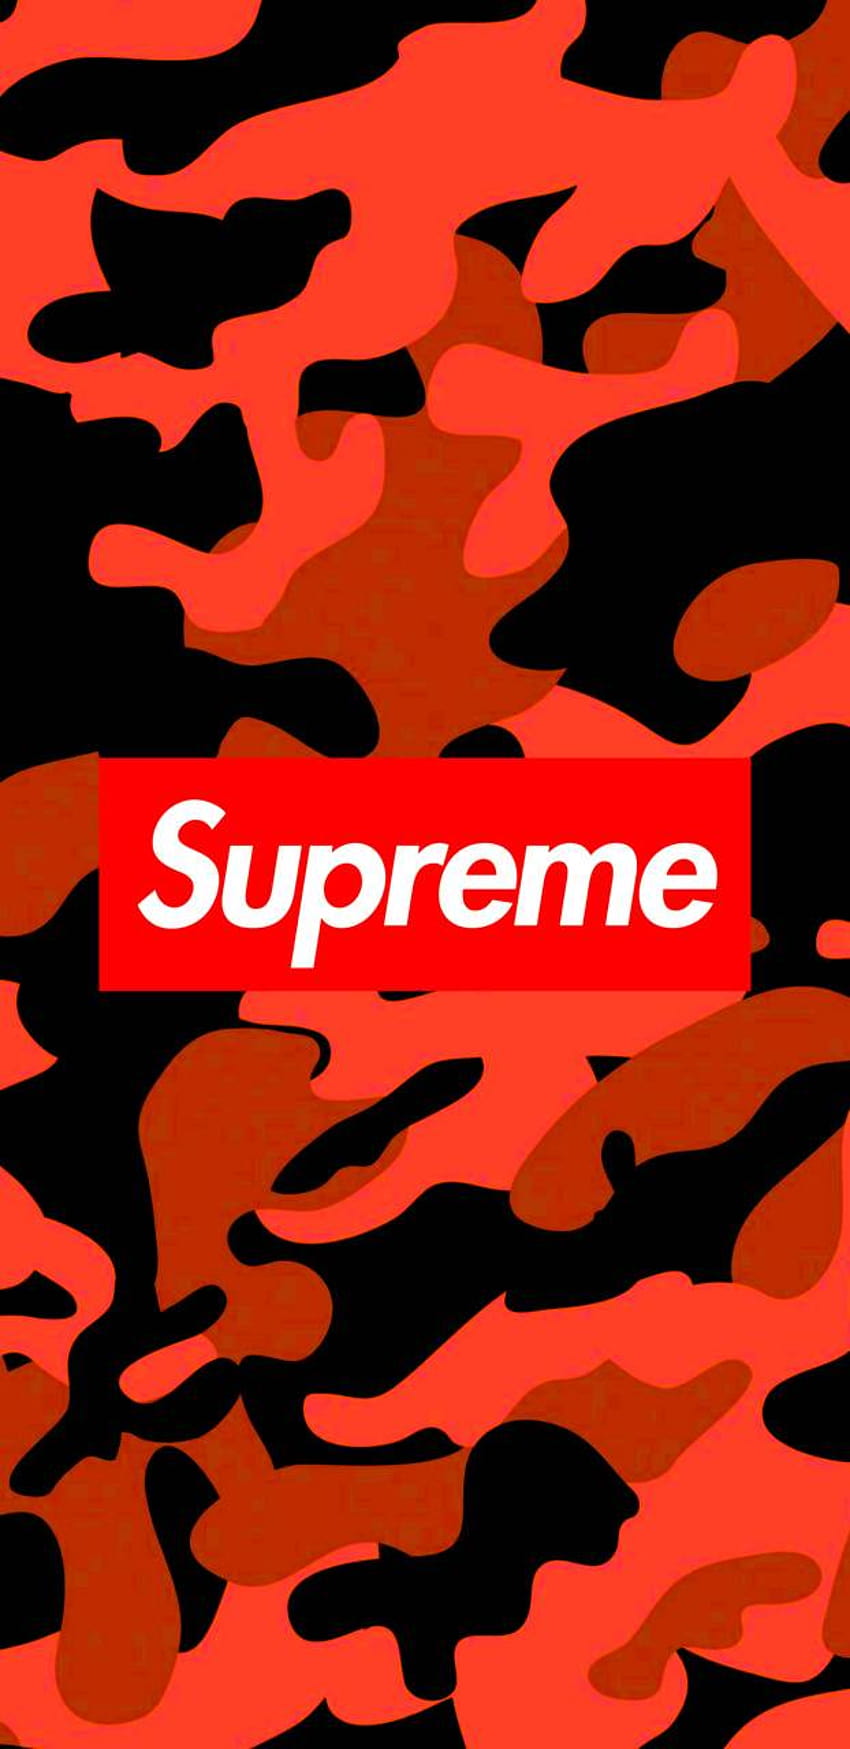 Supreme Camo by Anonwayy, cammo HD phone wallpaper